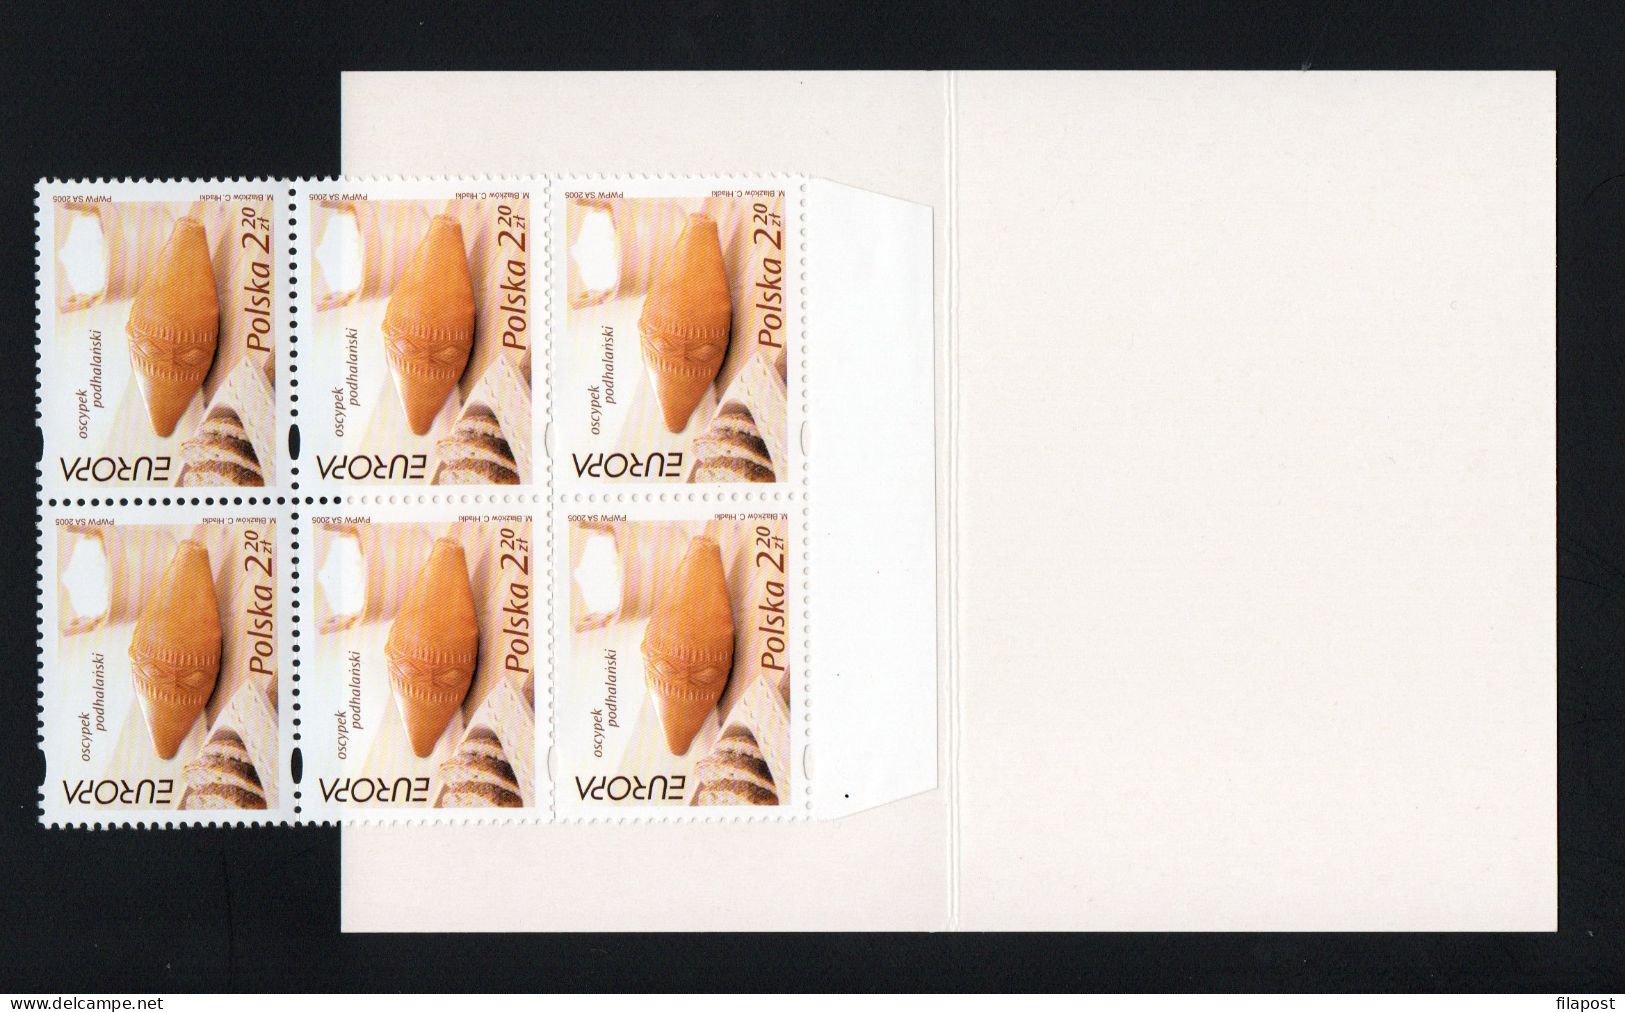 Poland 2005 Mi 4183 Europa - CEPT, Oscypek Cheese, Karpaty Mountain Traditional Food Booklet Set Of 6 Stamps MNH** - Carnets